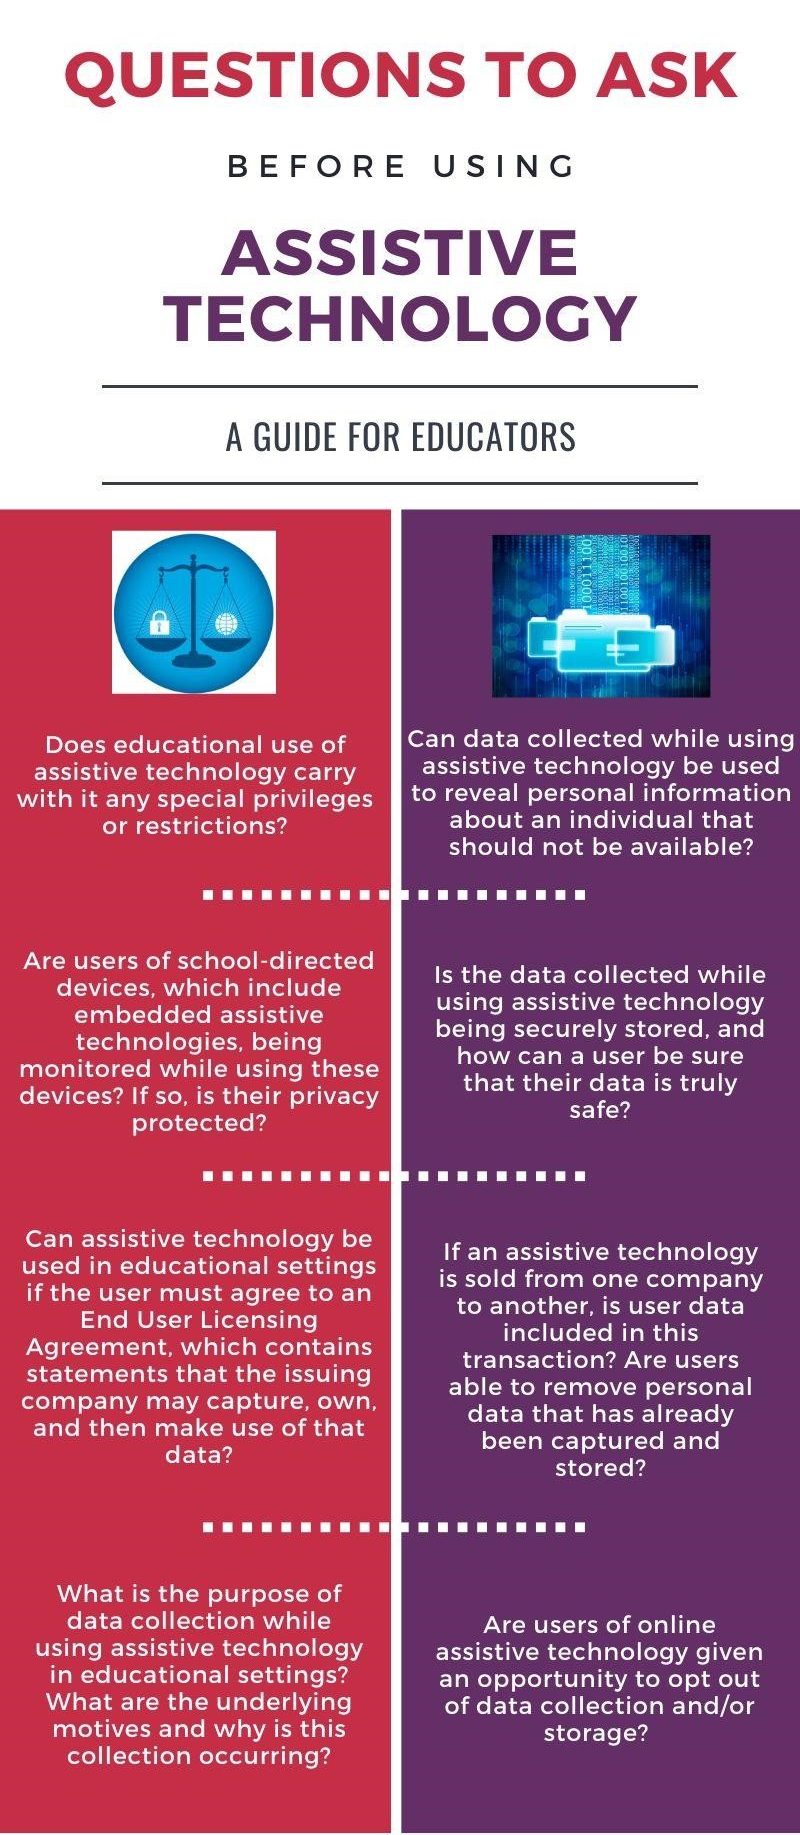 An infographic providing educators with questions to ask before using assistive technologies.